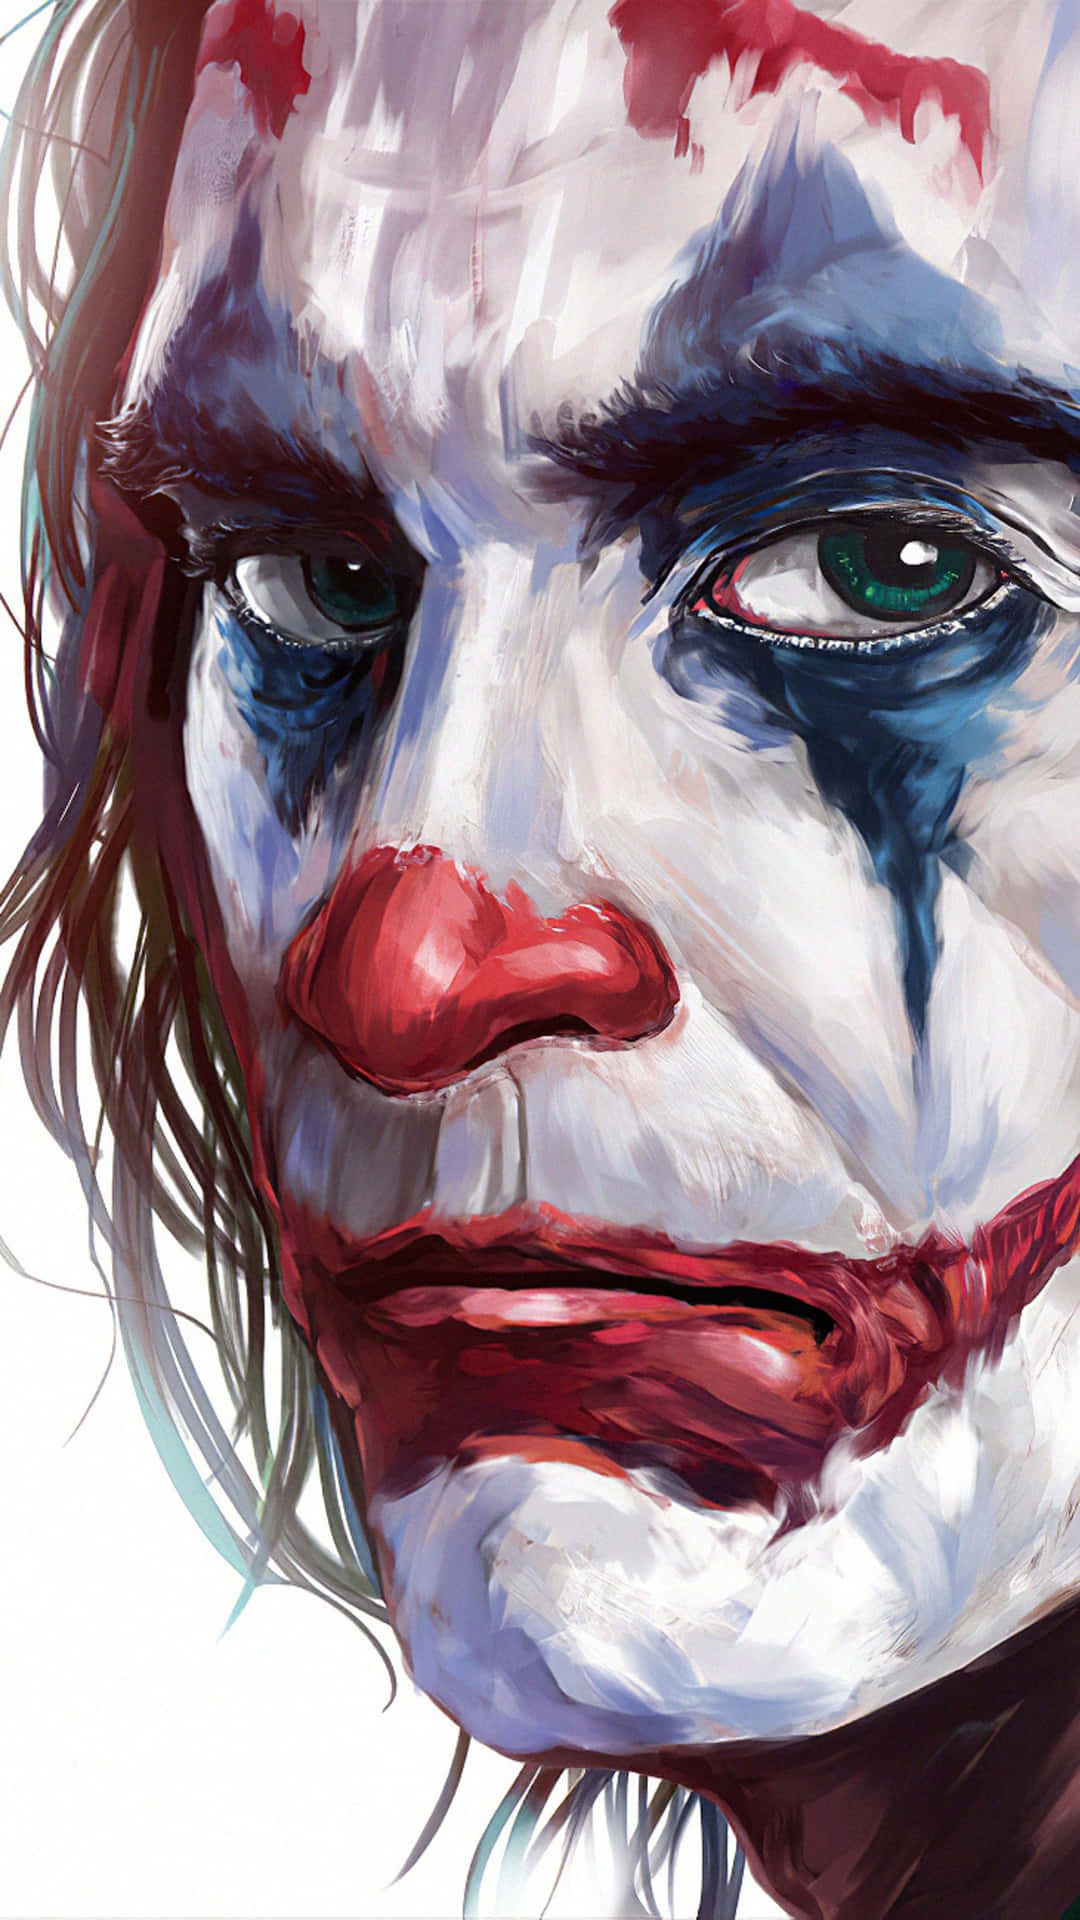 A Painting Of A Joker With Red And Blue Makeup